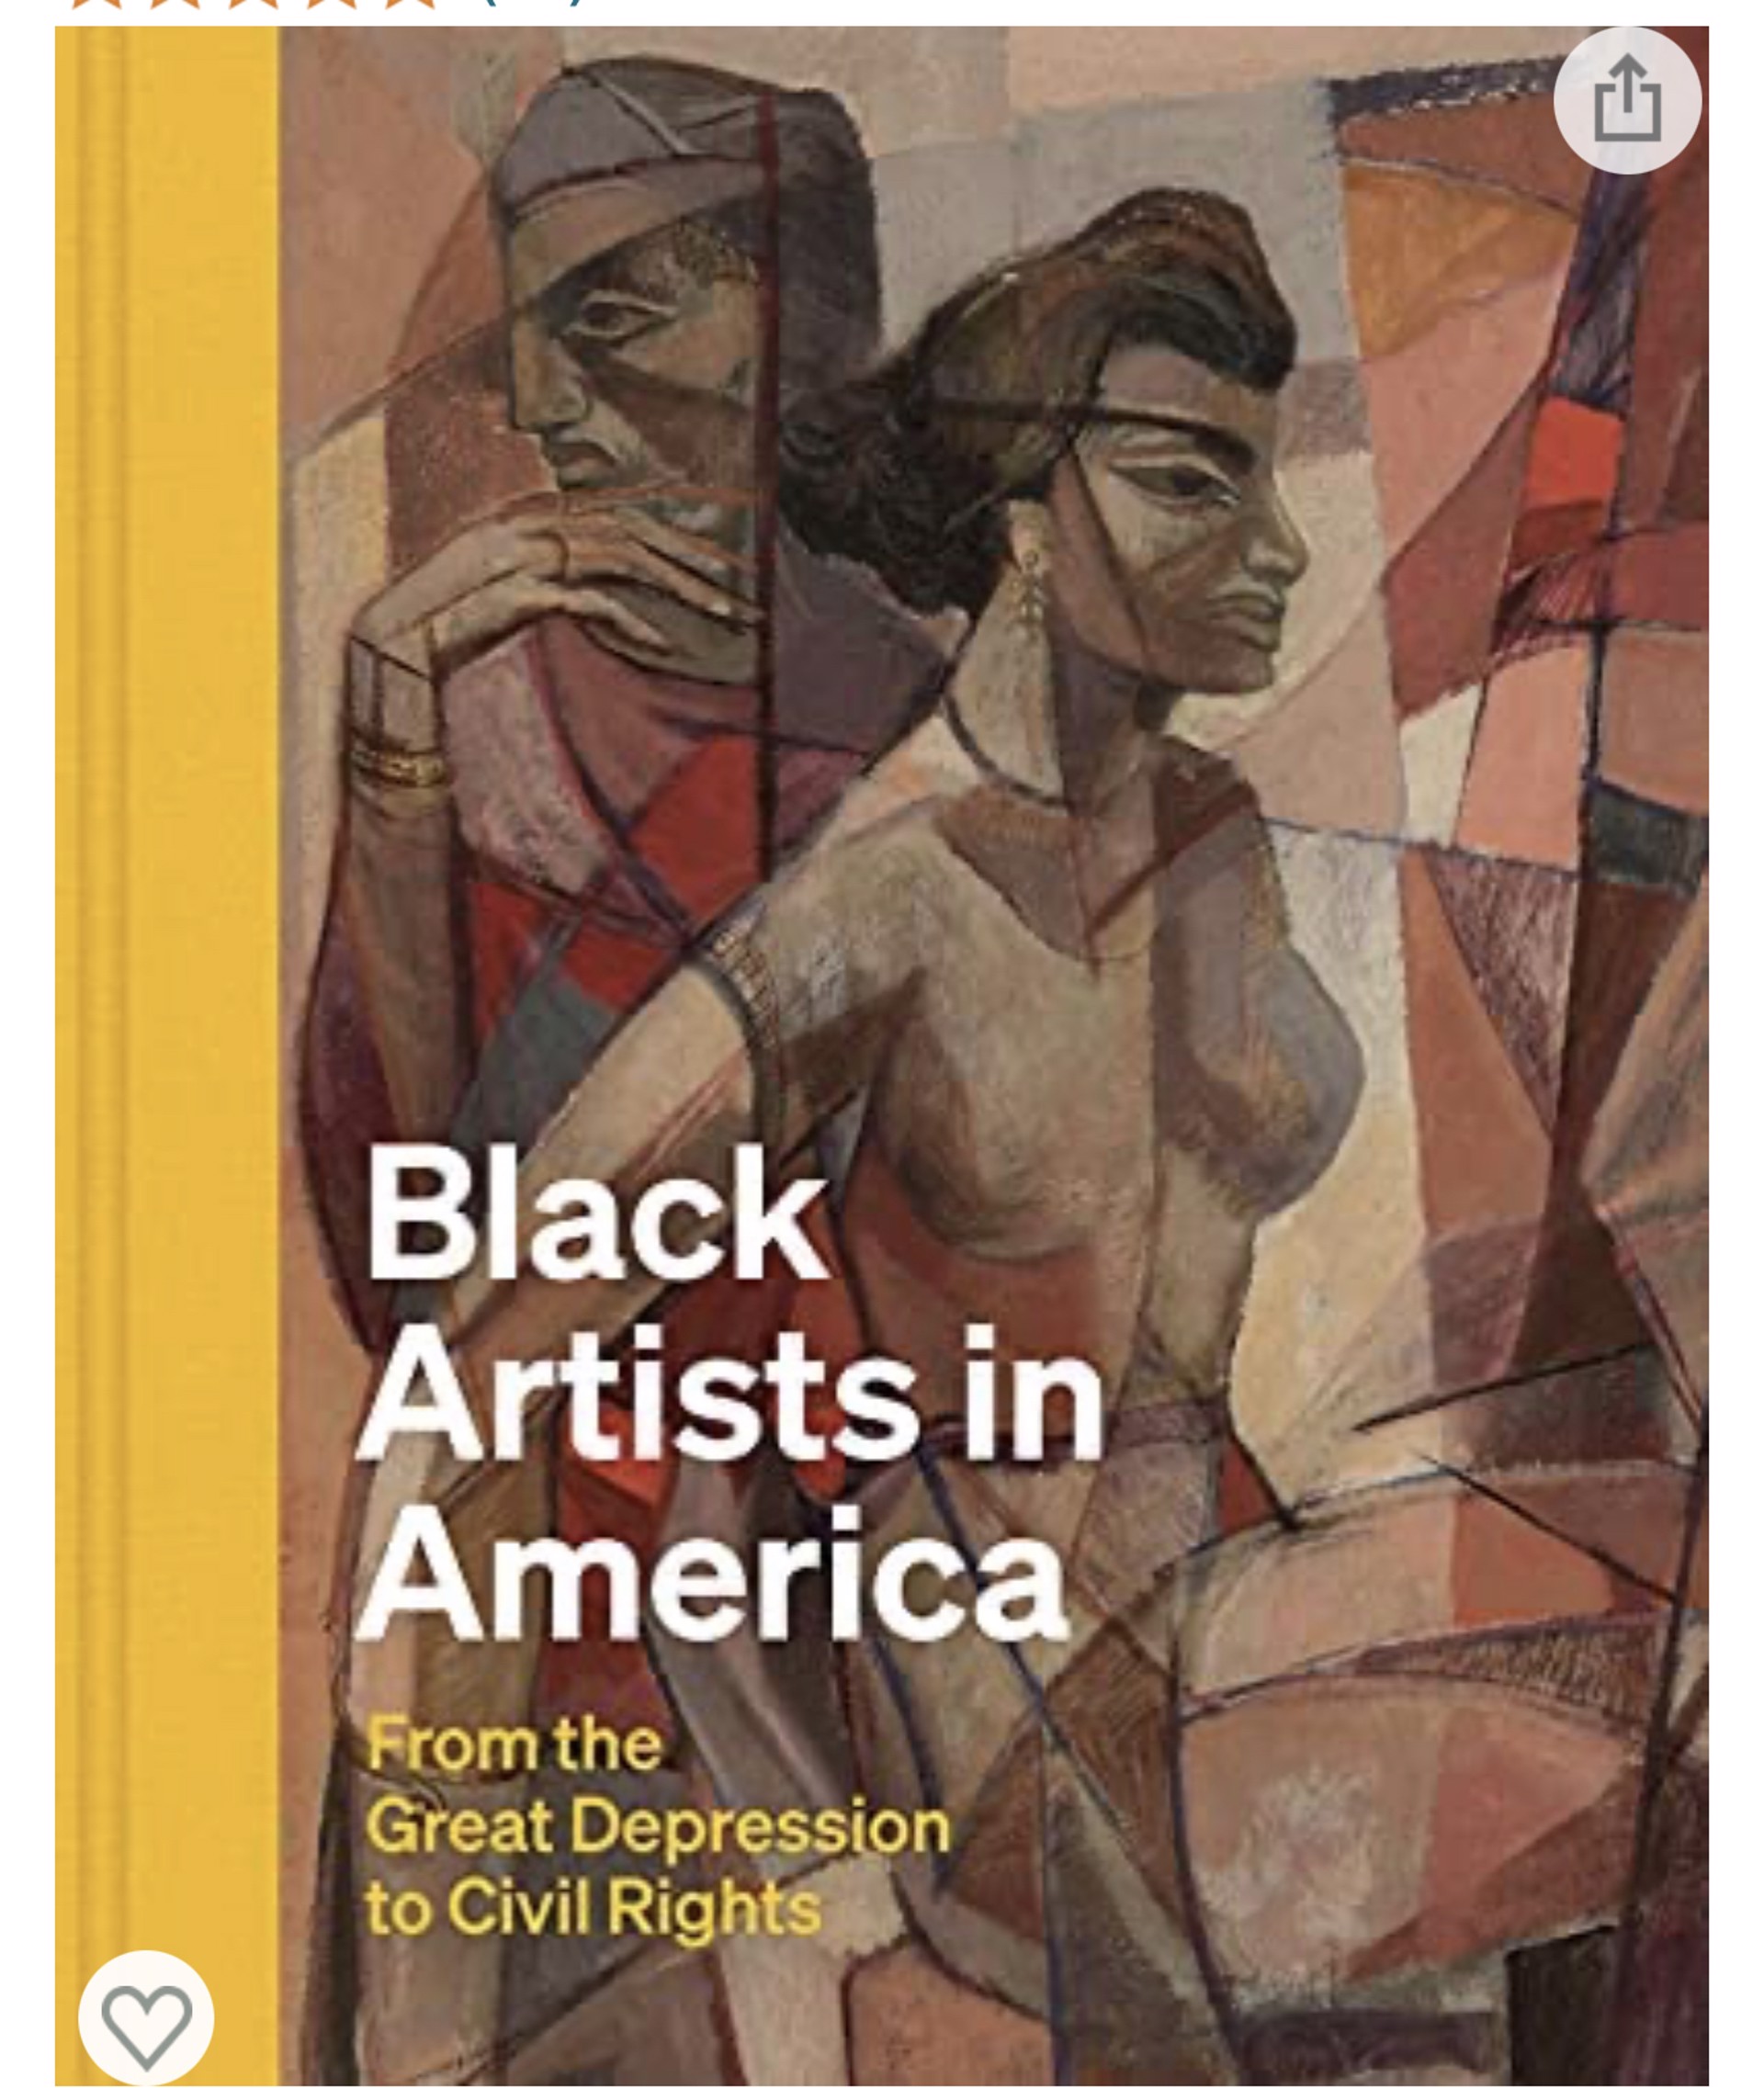 Black Artists in America by Books